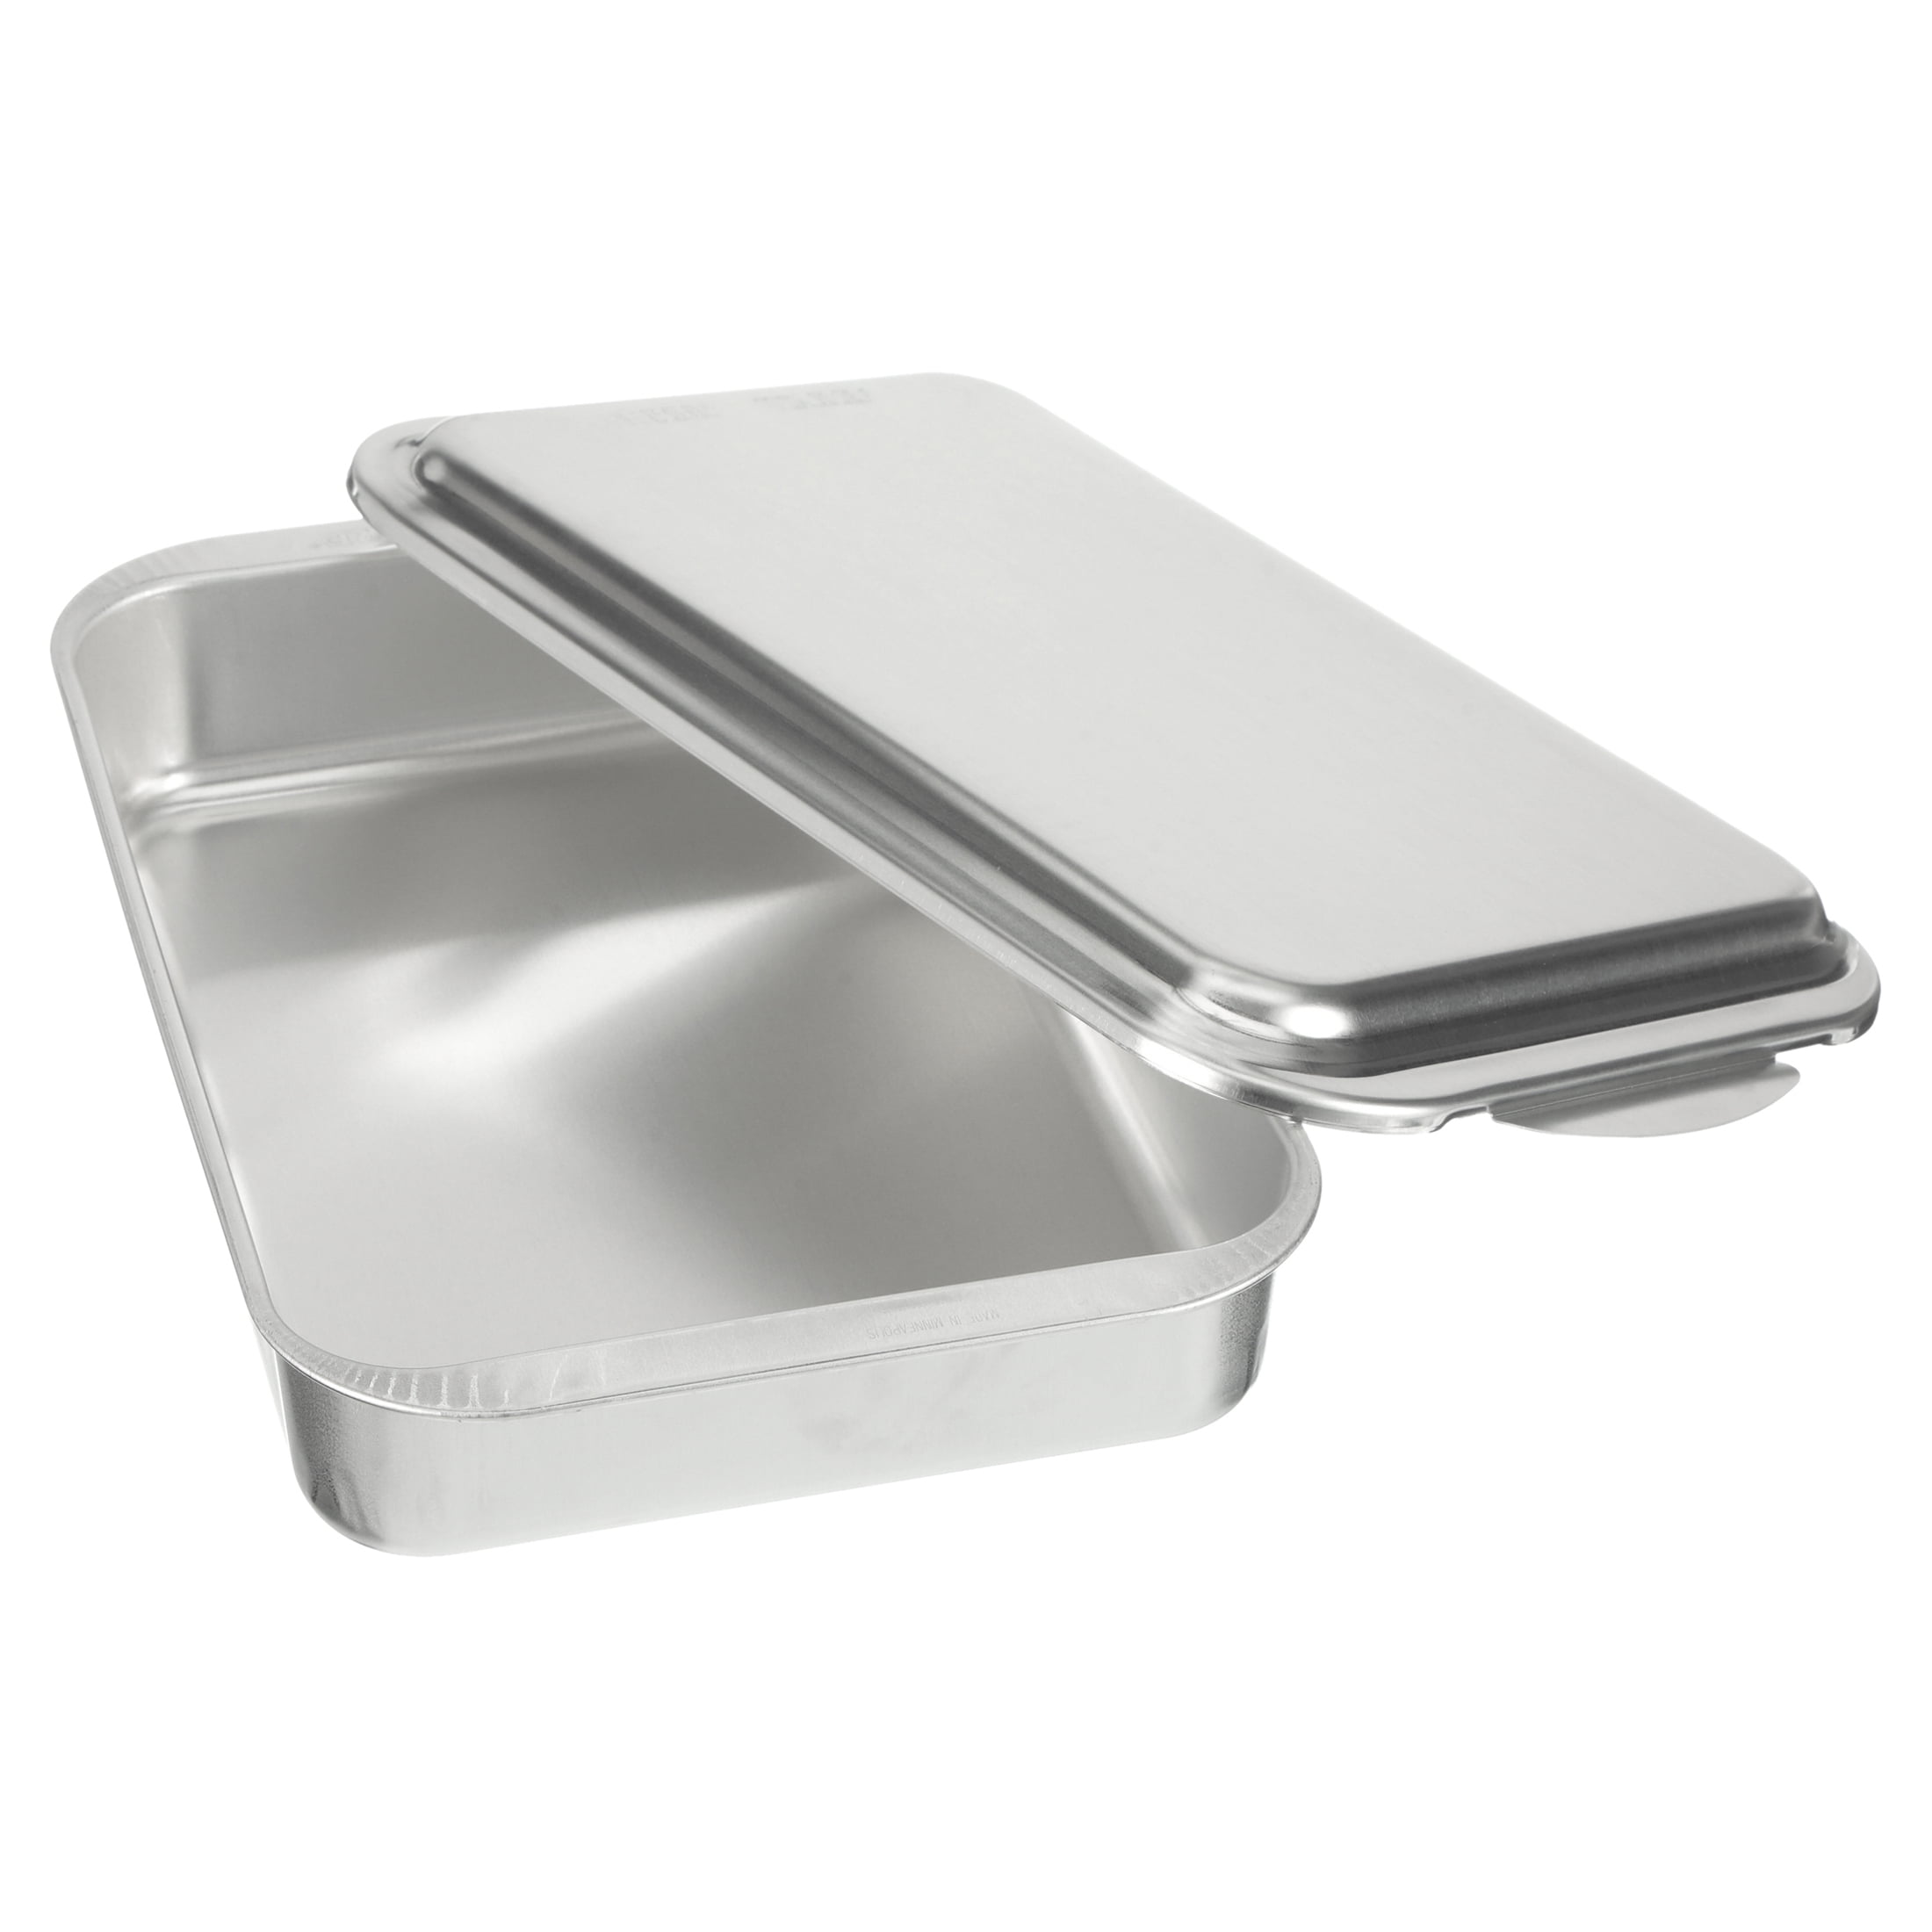 Nordic Ware Classic Metal Covered Cake Pan, 9x13 Inches – ShopBobbys